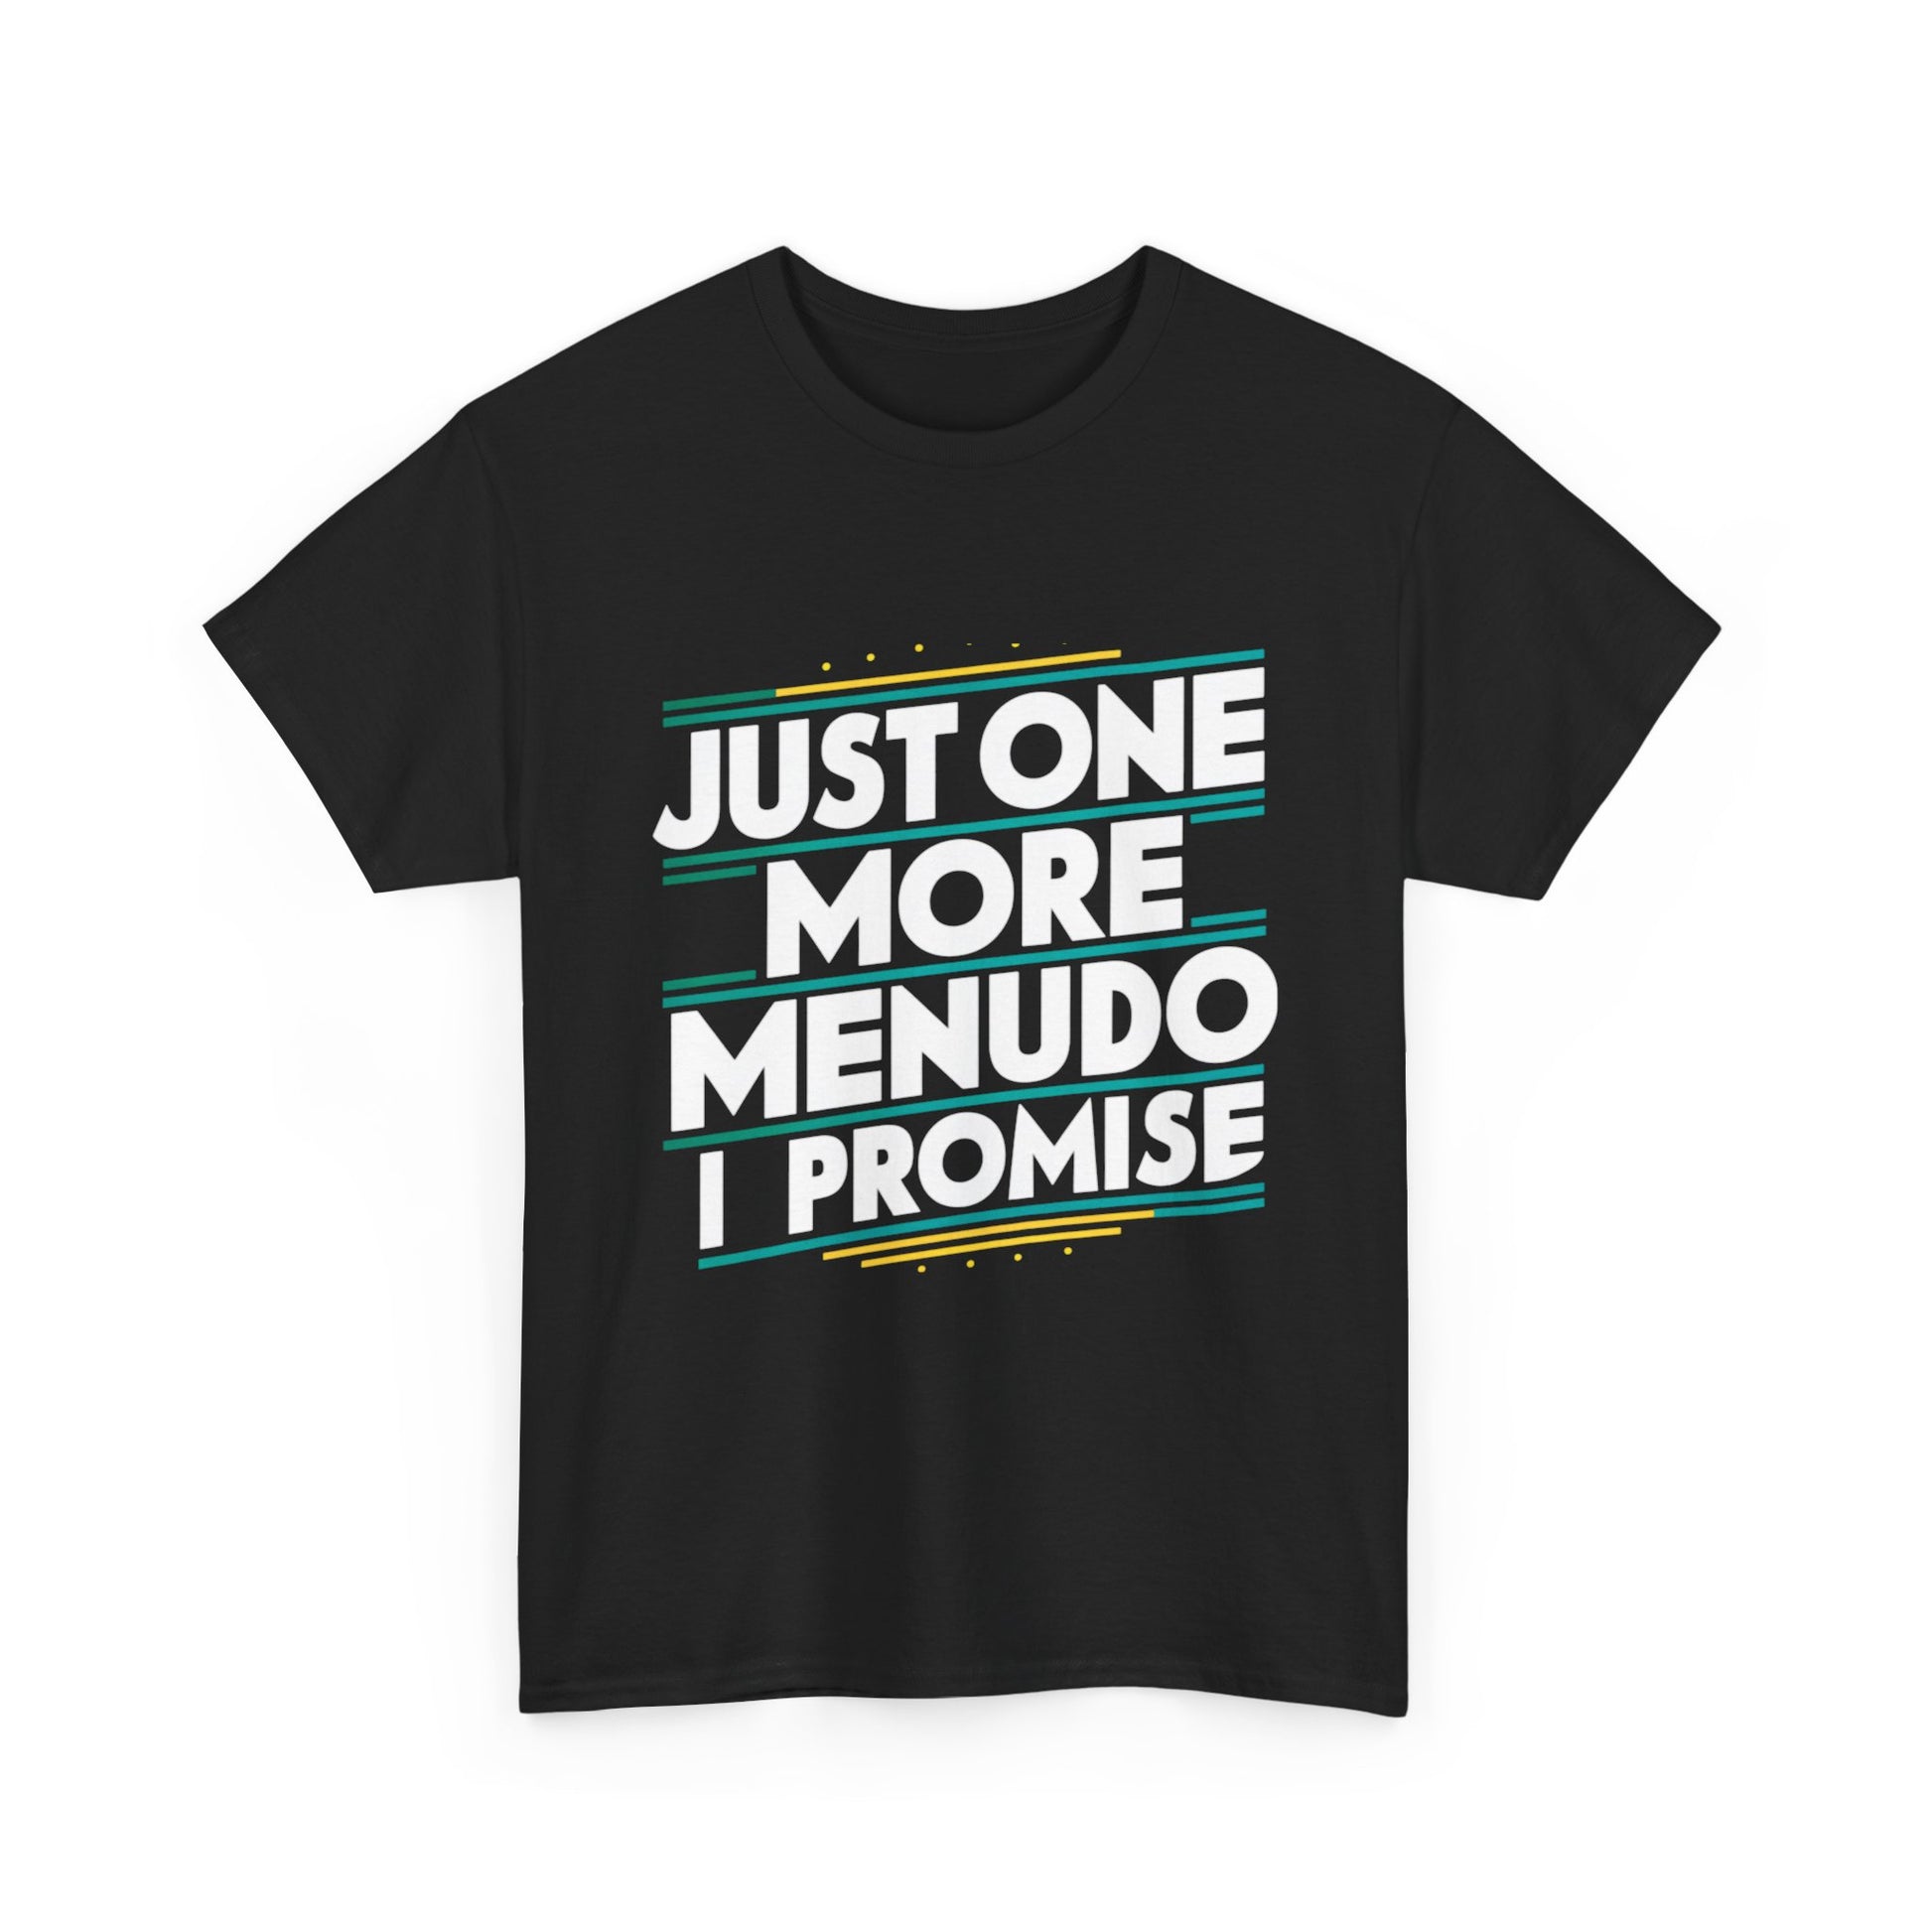 Just One More Menudo I Promise Mexican Food Graphic Unisex Heavy Cotton Tee Cotton Funny Humorous Graphic Soft Premium Unisex Men Women Black T-shirt Birthday Gift-15